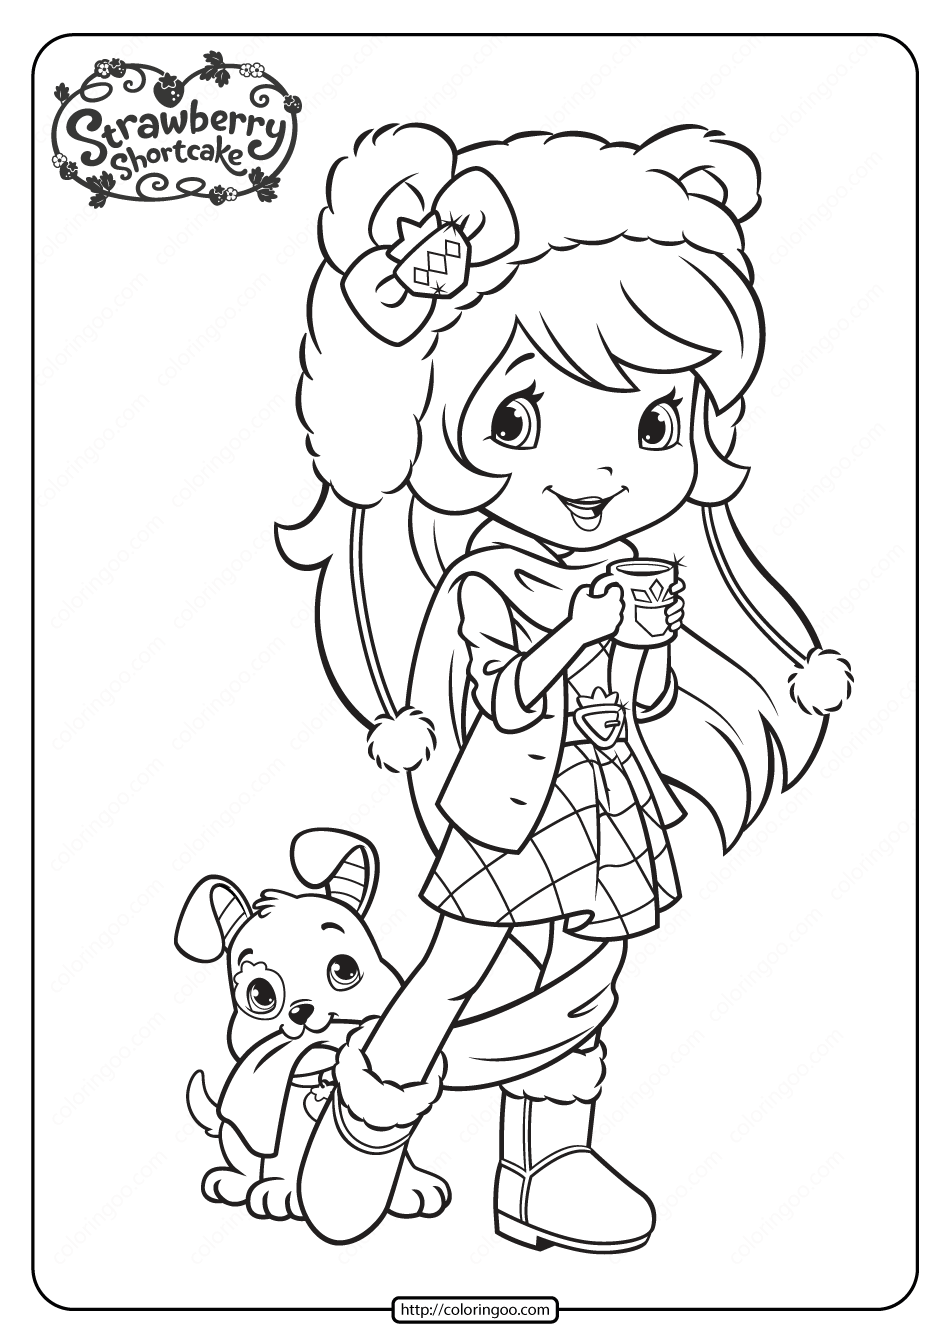 Printable Strawberry Shortcake Coloring Pages   20